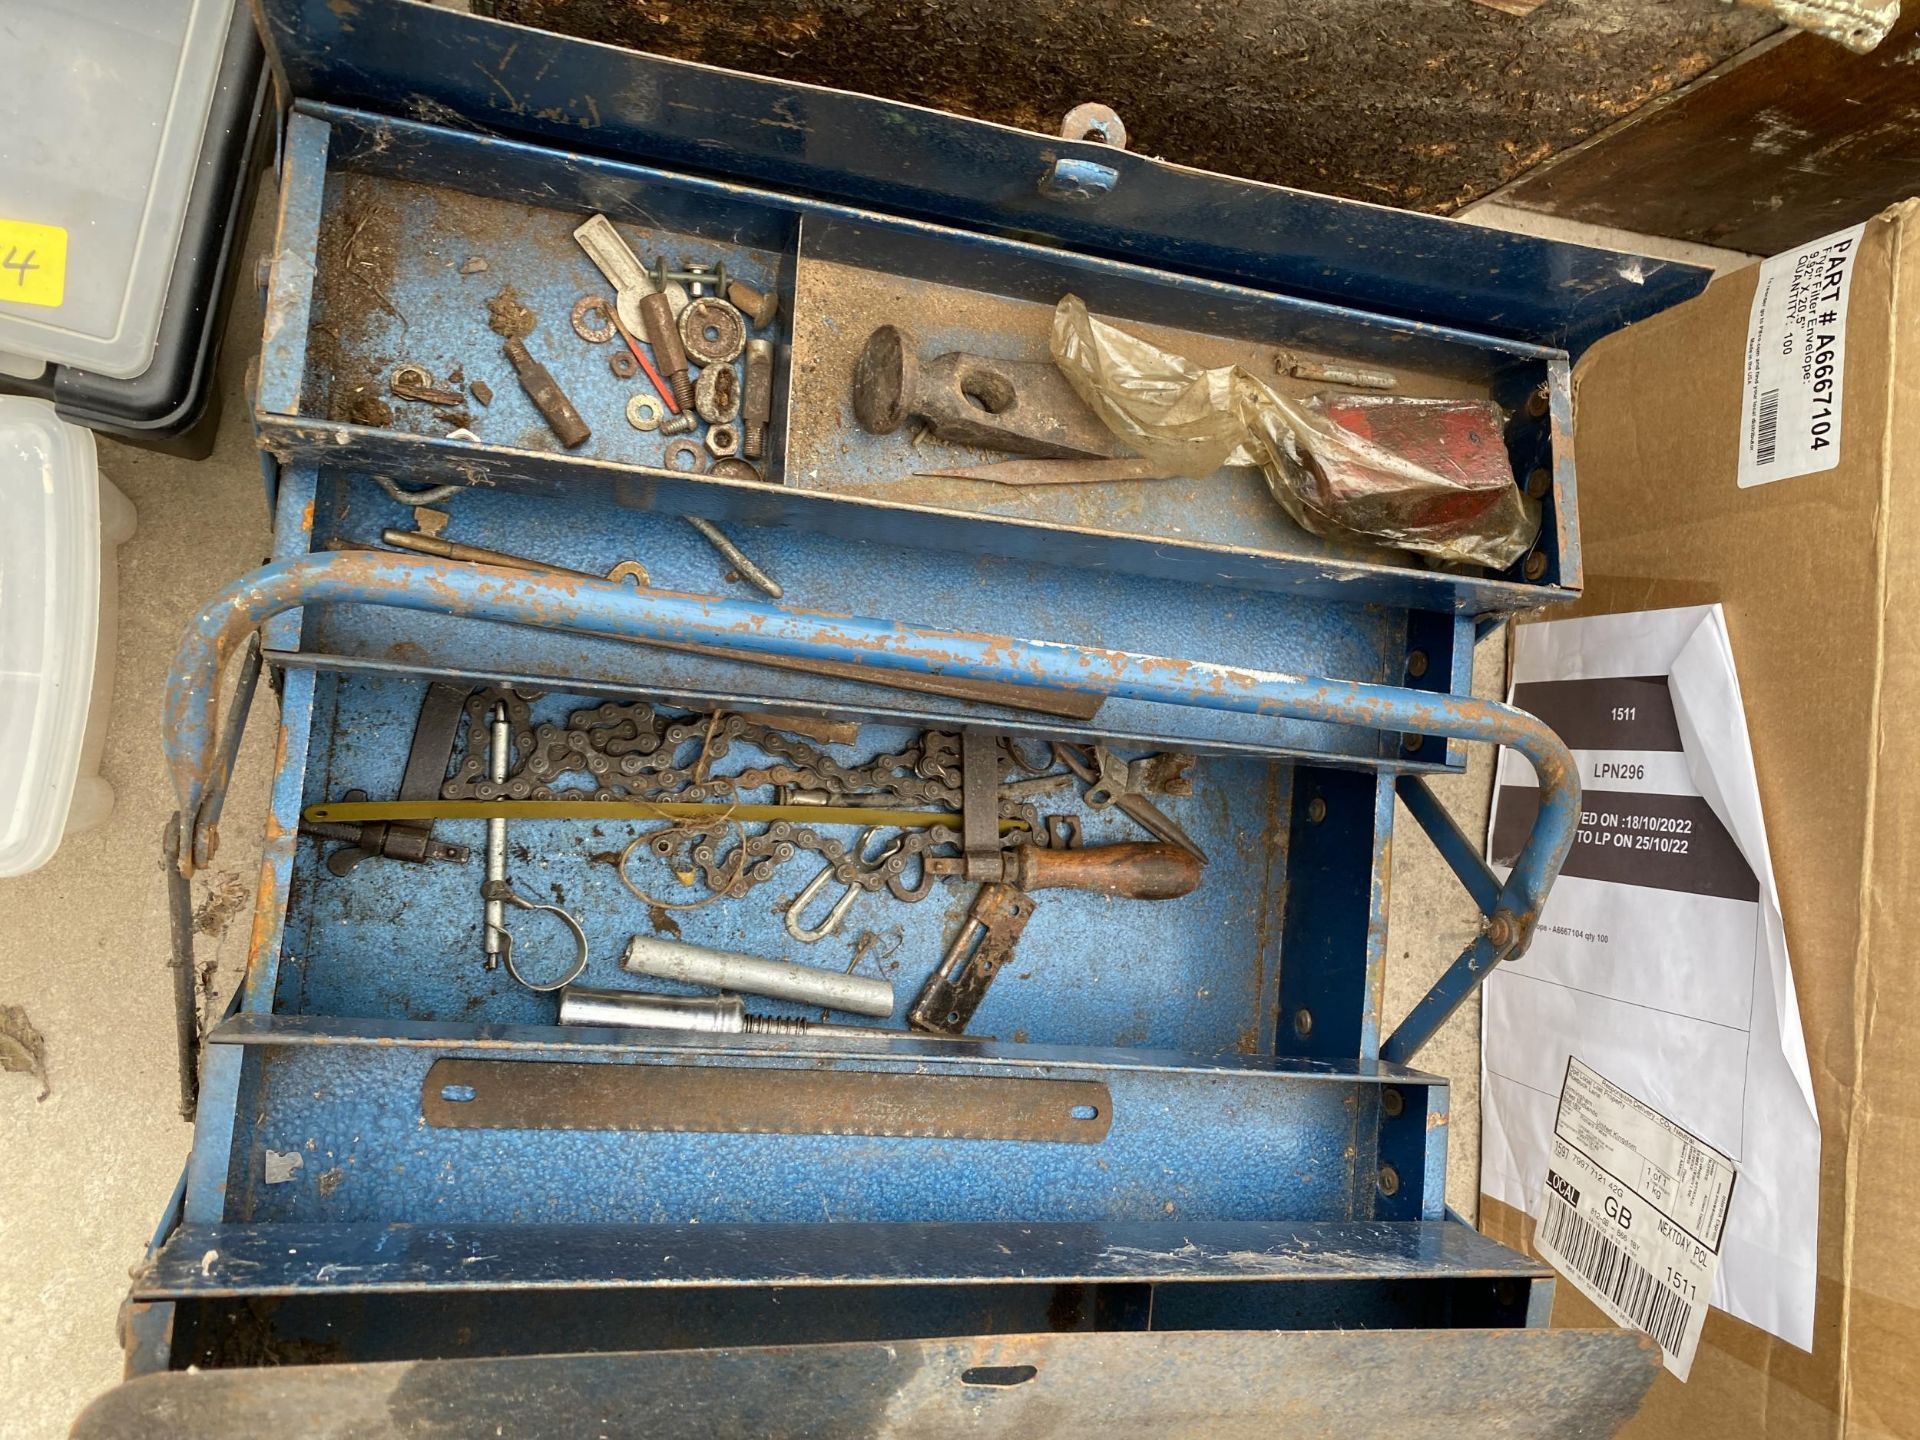 TWO PLASTIC TOOL BOXES CONTAINING AN ASSORTMENT OF TOOLS AND HARDWARE - Image 2 of 4